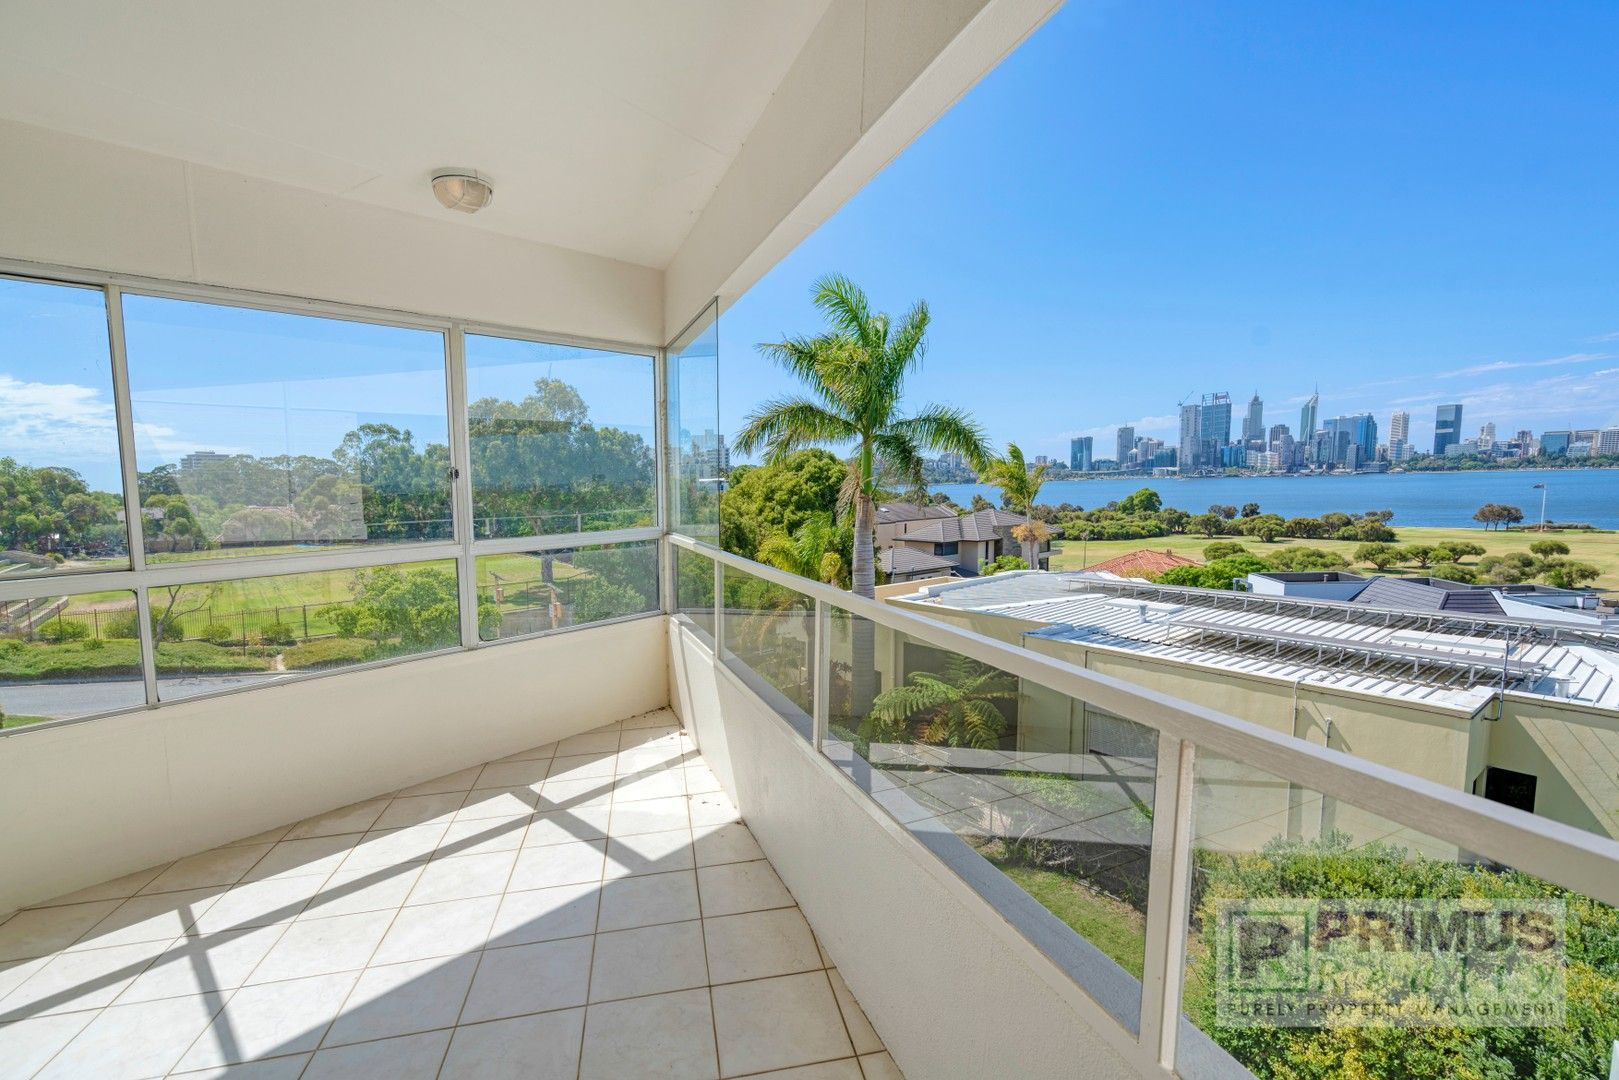 2 bedrooms Apartment / Unit / Flat in 8/12 Forrest Street SOUTH PERTH WA, 6151